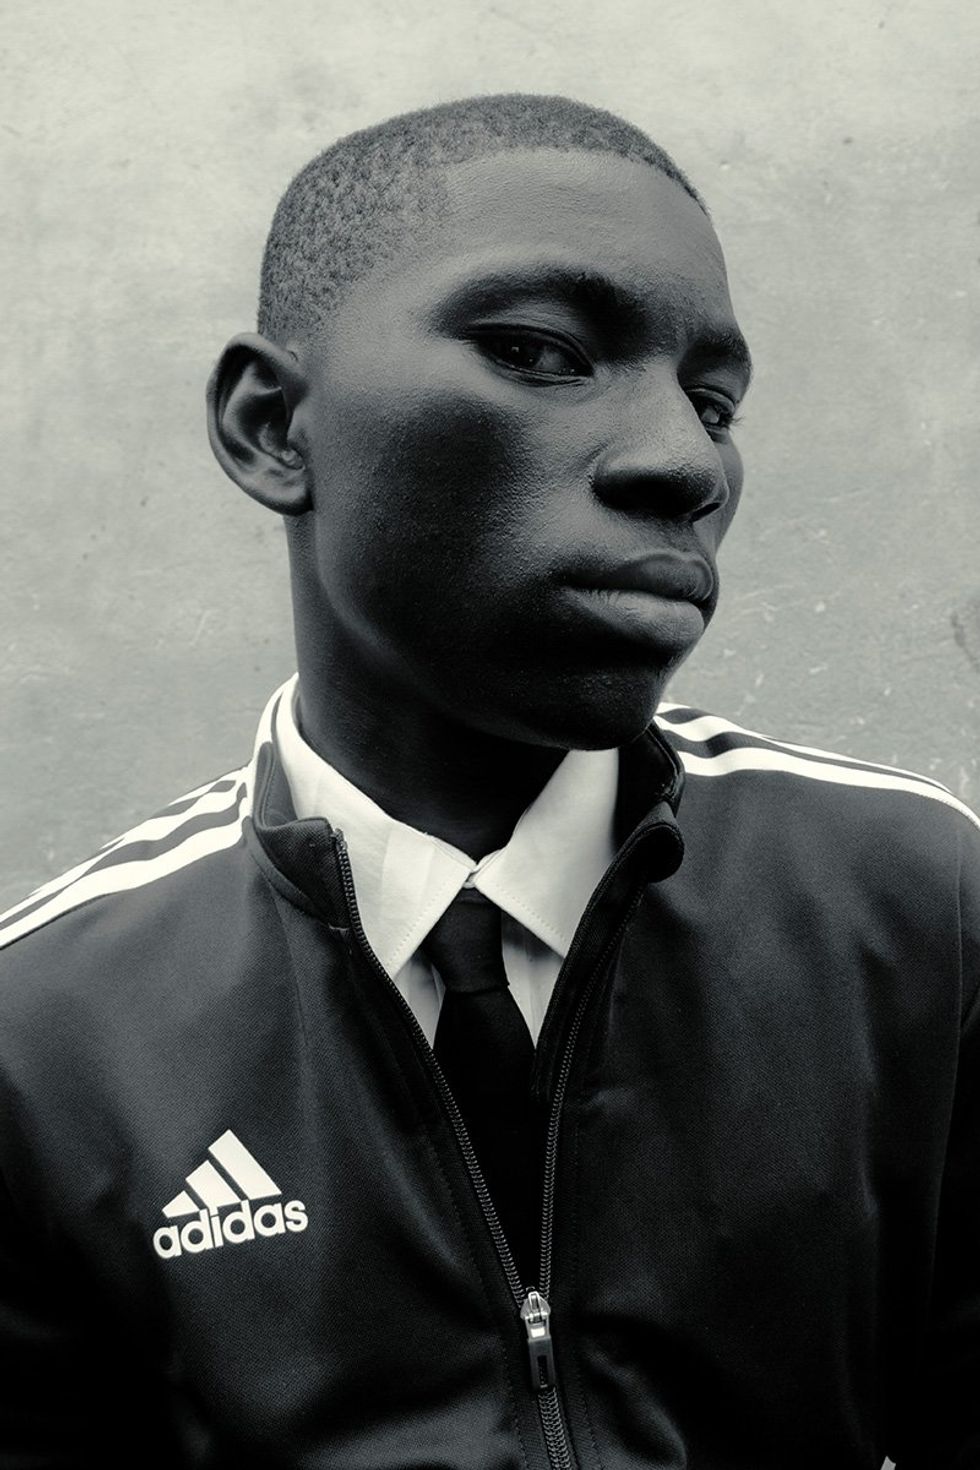 A black and white image taken by the photographer of a young boy wearing an Adidas jacket over a tie. 